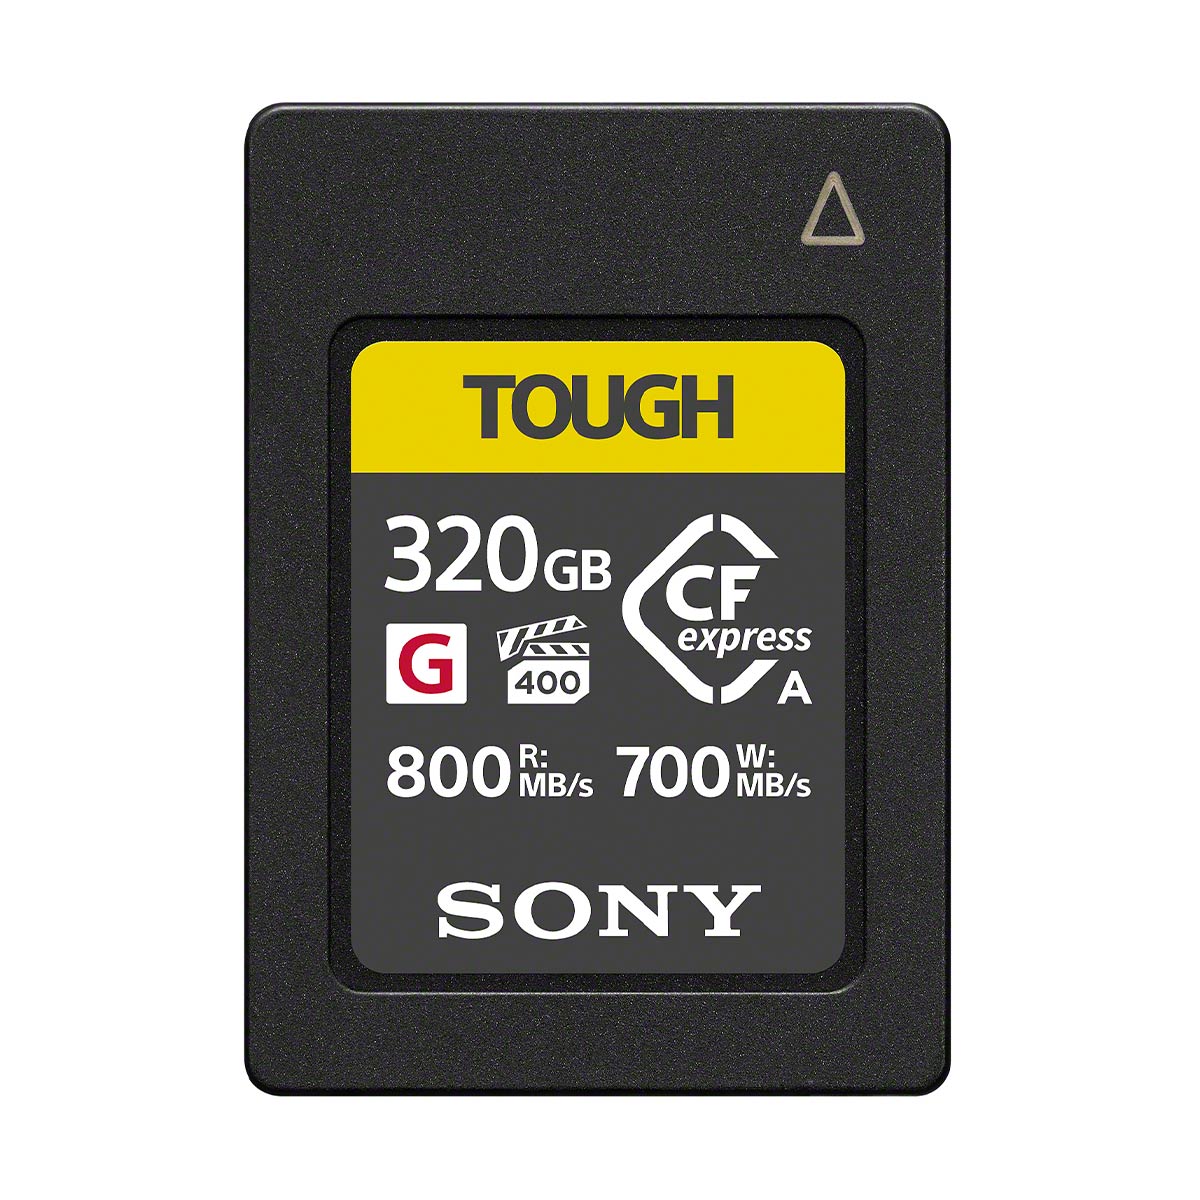 Sony 320GB CFexpress Type A Memory Card (VPG 400) *OPEN BOX*